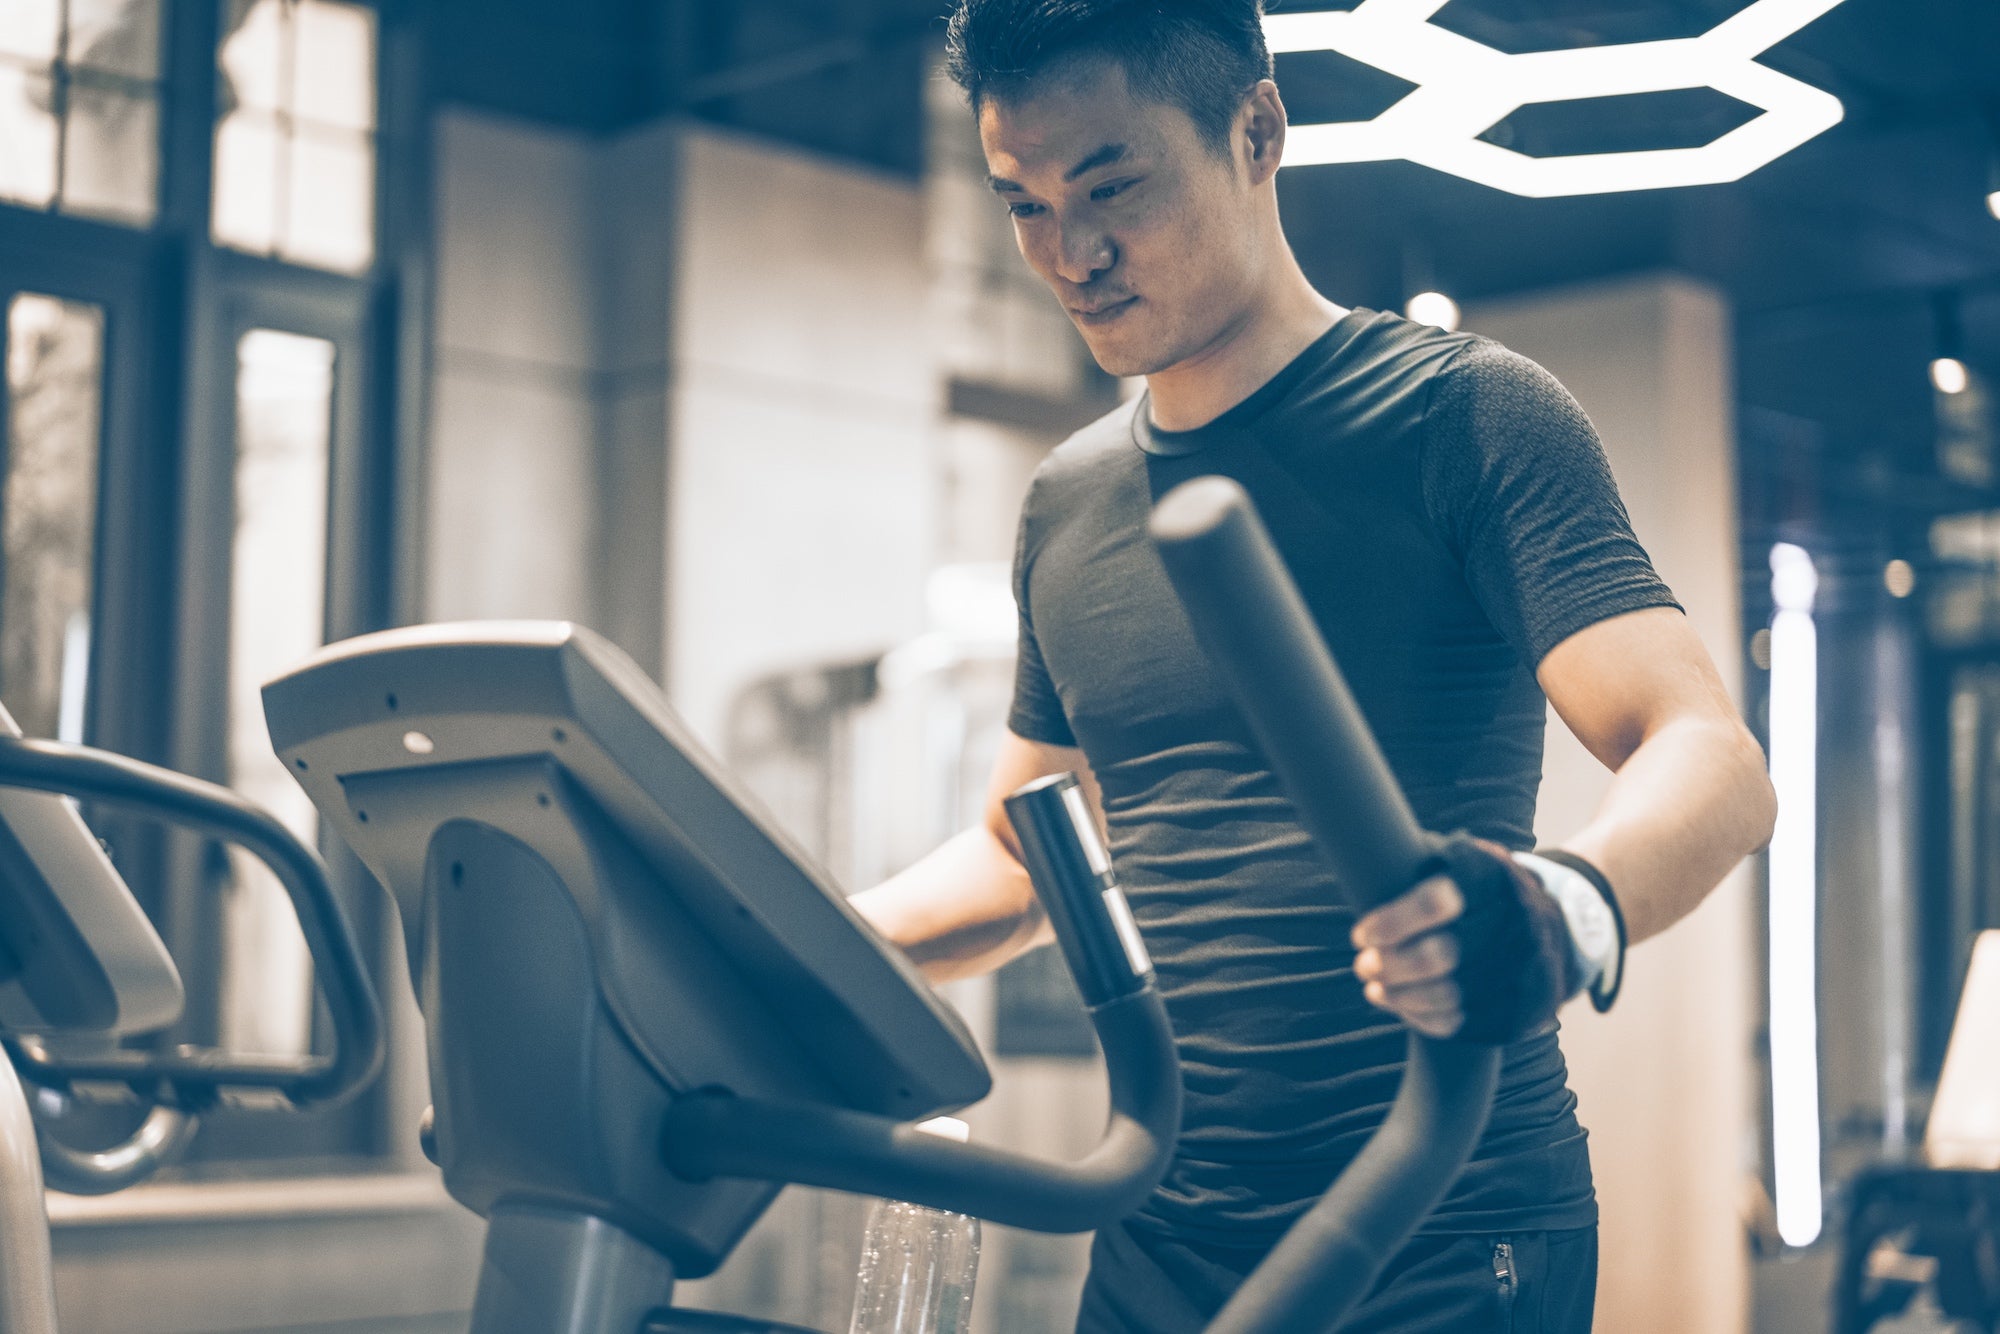 Cross trainer benefits: Why it's a valuable tool for runners